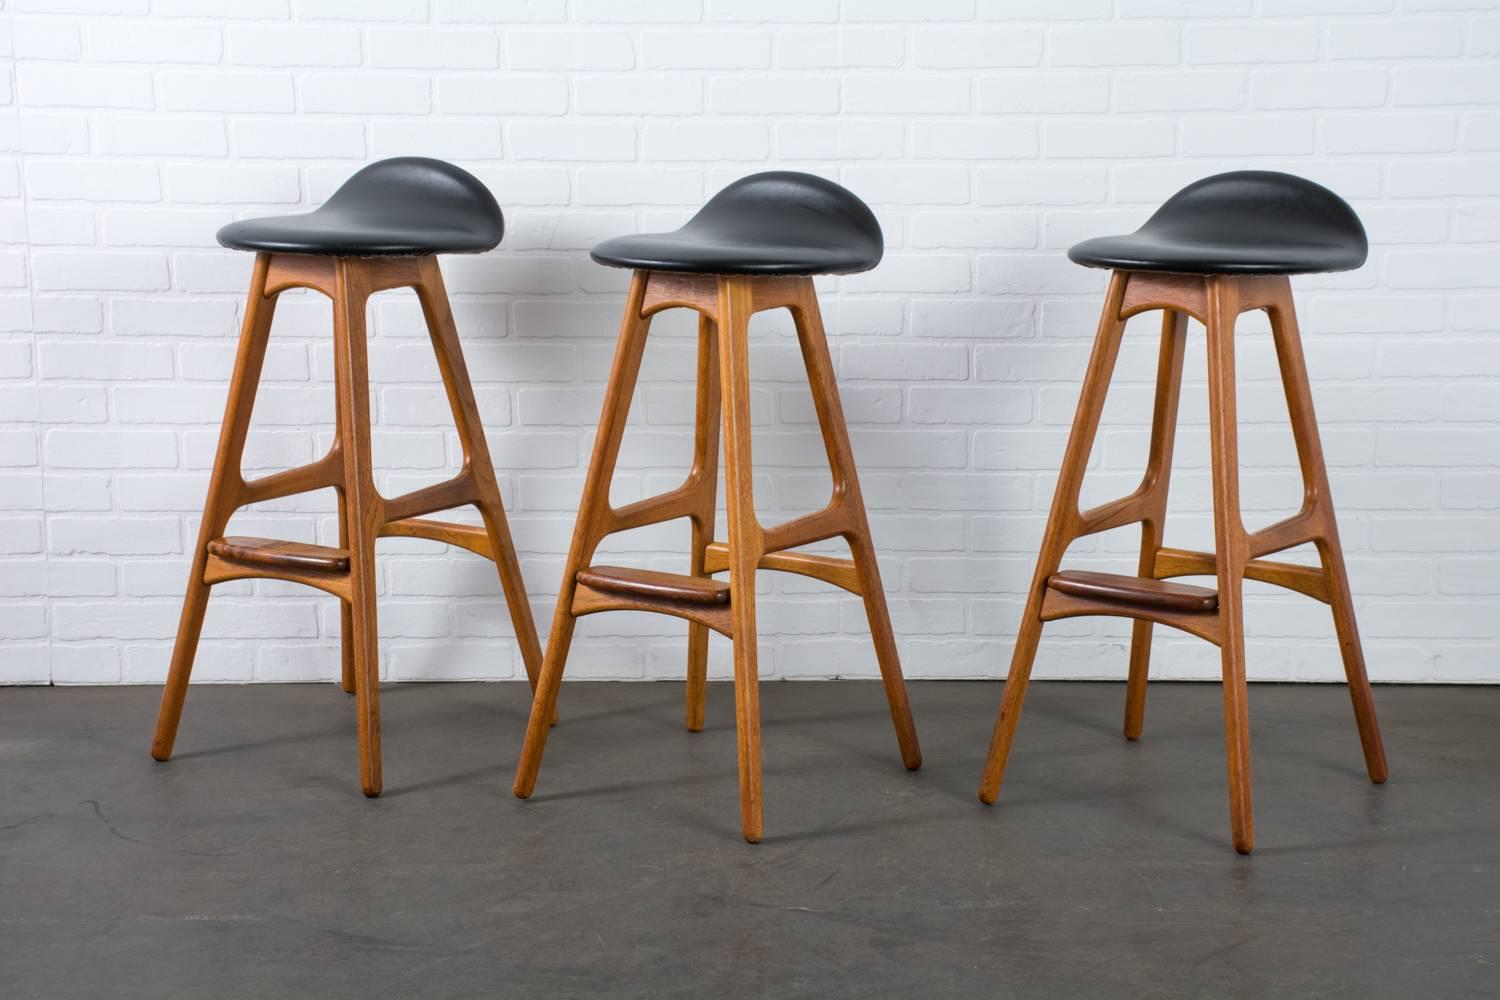 These vintage Mid-Century bar stools were designed by Erik Buch (also known as Erik 'Buck' in English), circa 1960s, Denmark. The frames are teak with a rosewood foot rest. These stools have the original black Naugahyde upholstery.